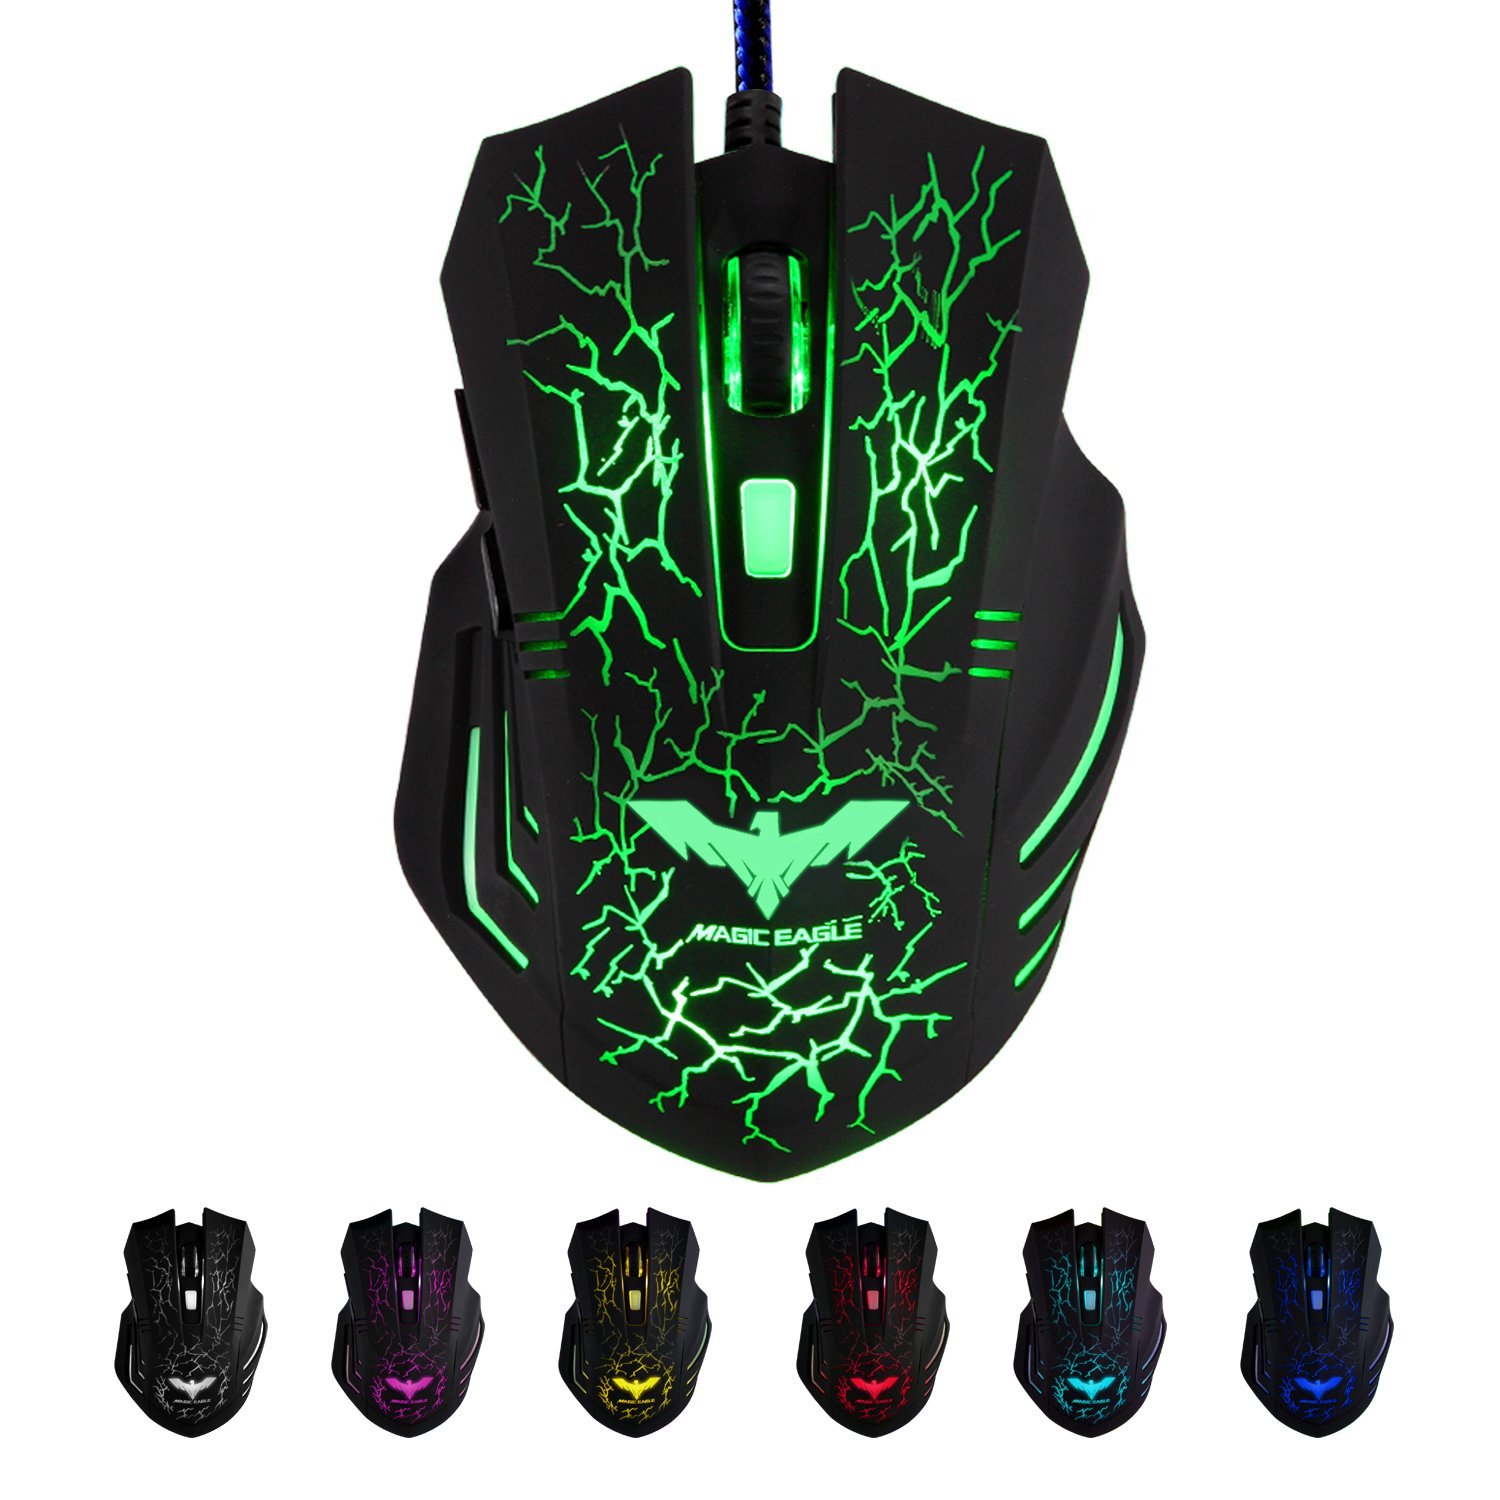 magic eagle gaming mouse how to stop colors